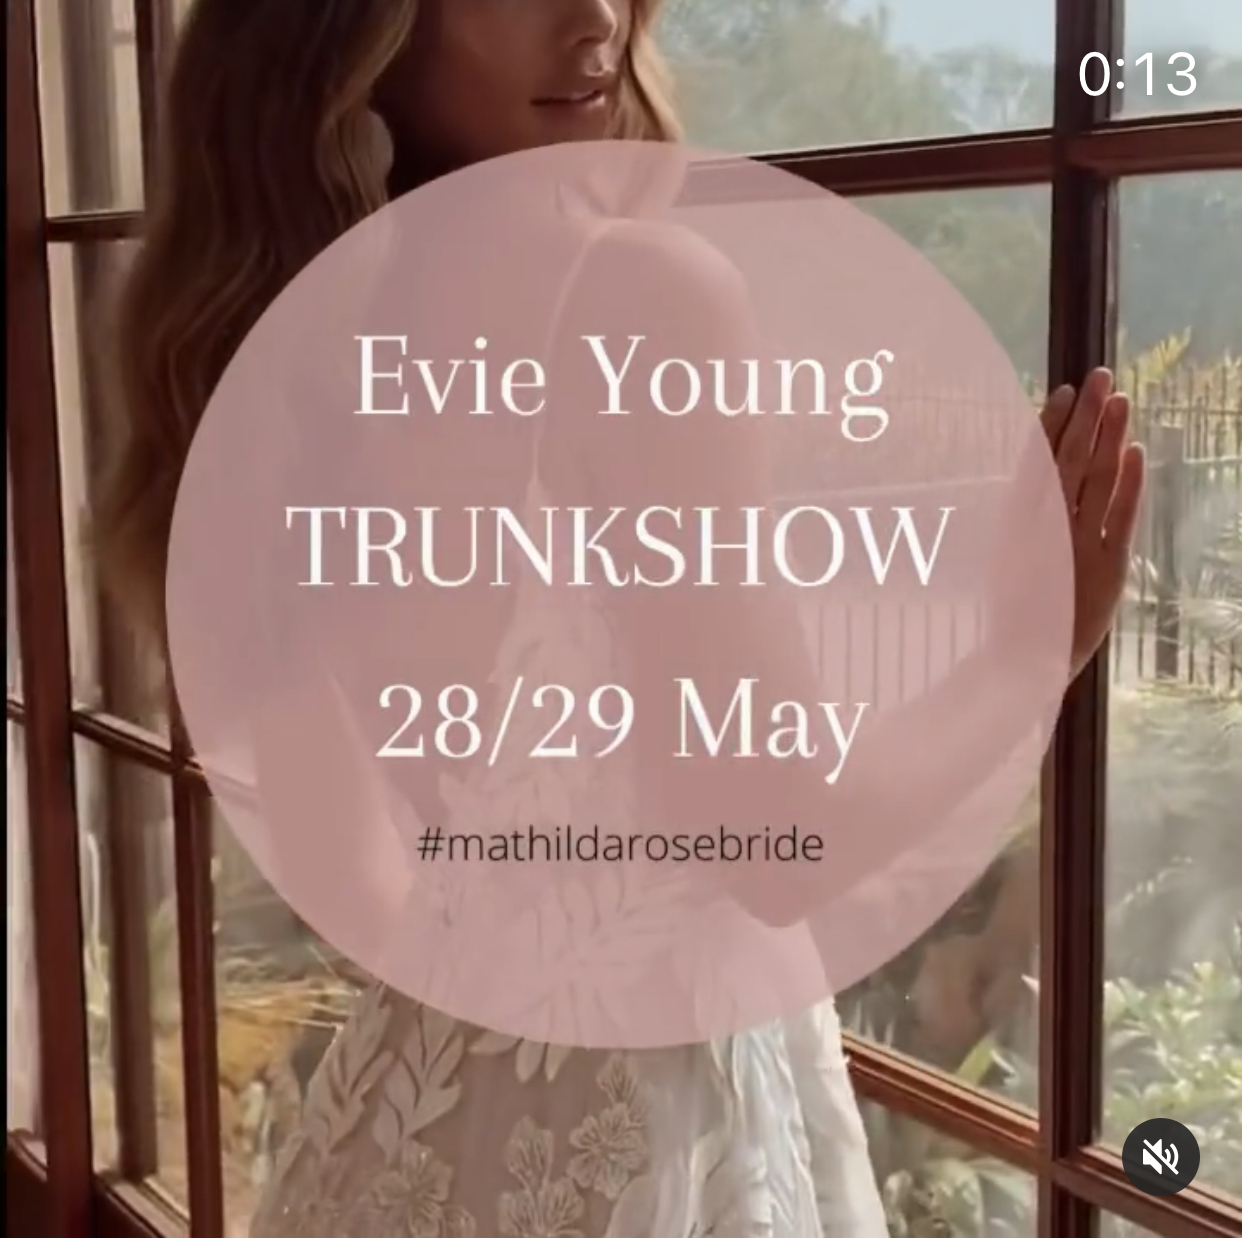 evie young madi lane trunk show